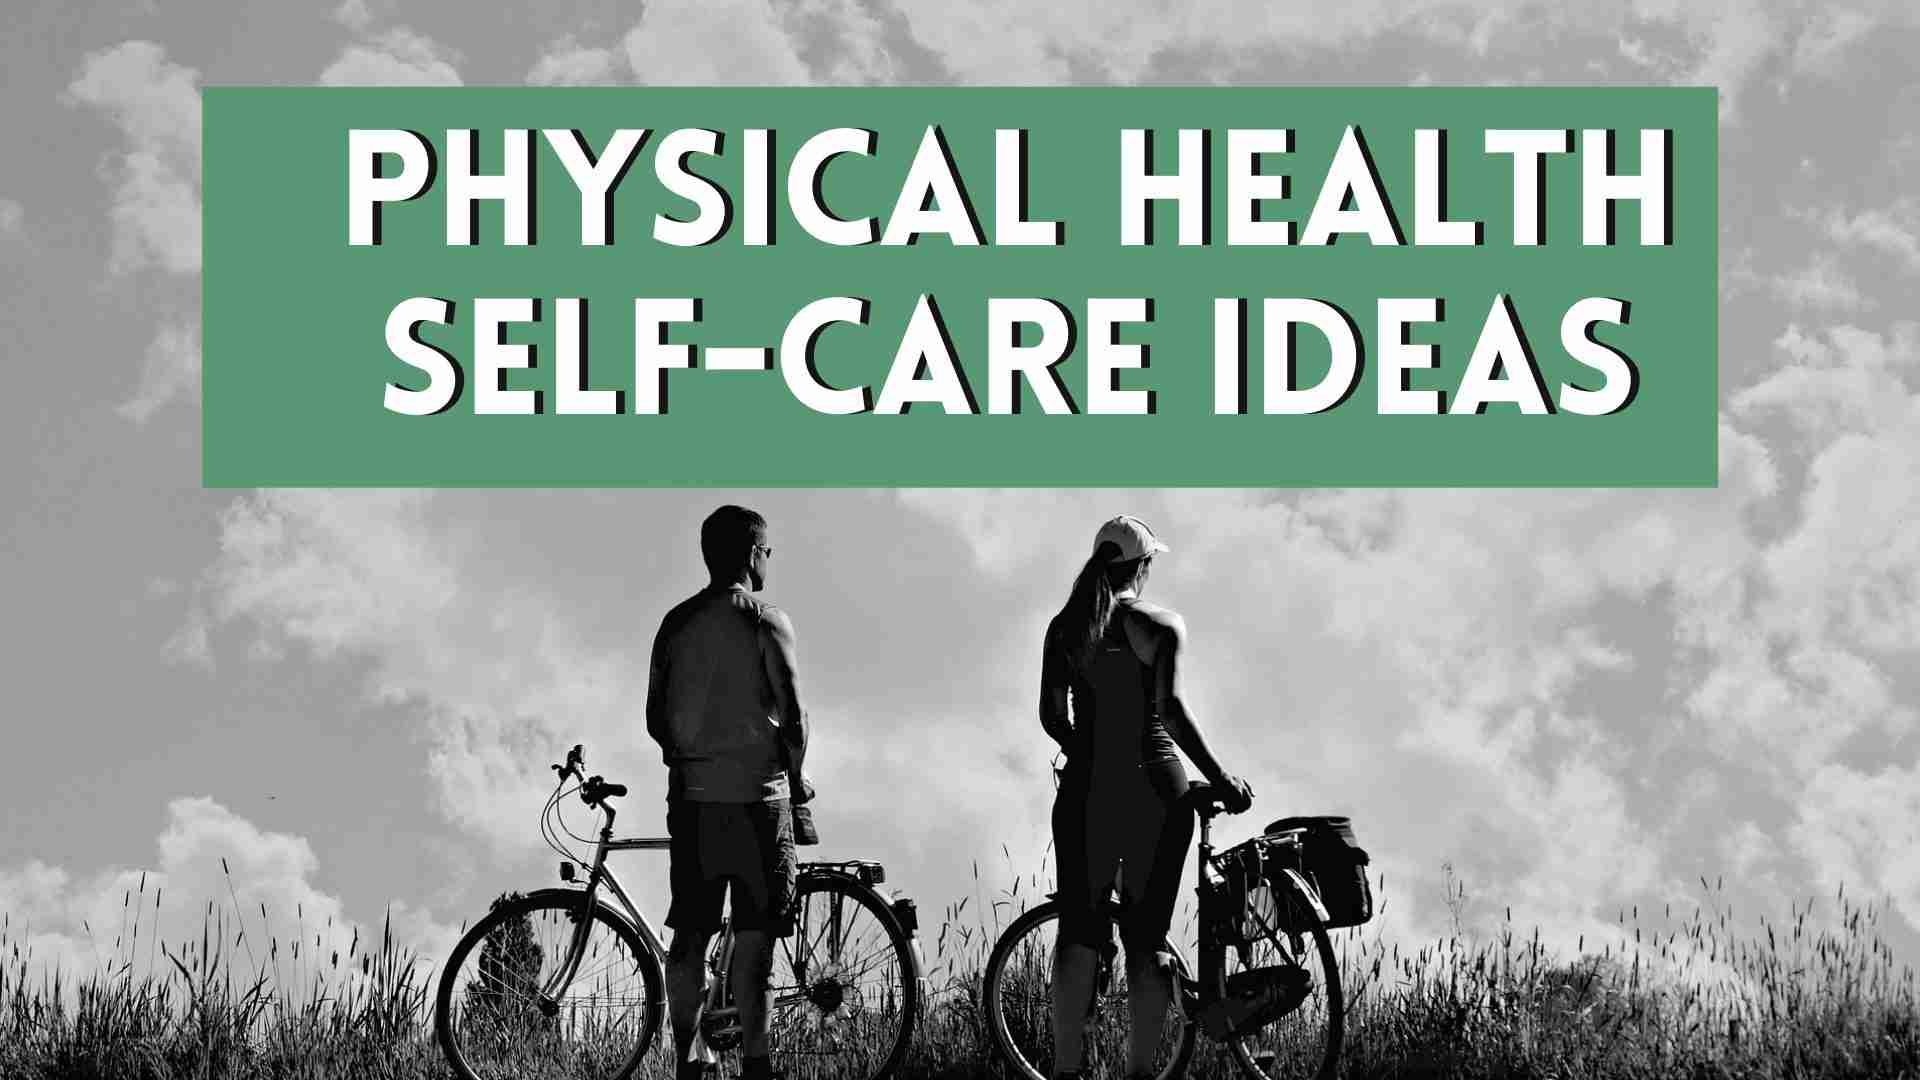 Physical Health Self-Care Ideas, man and woman standing next to bicycles. 